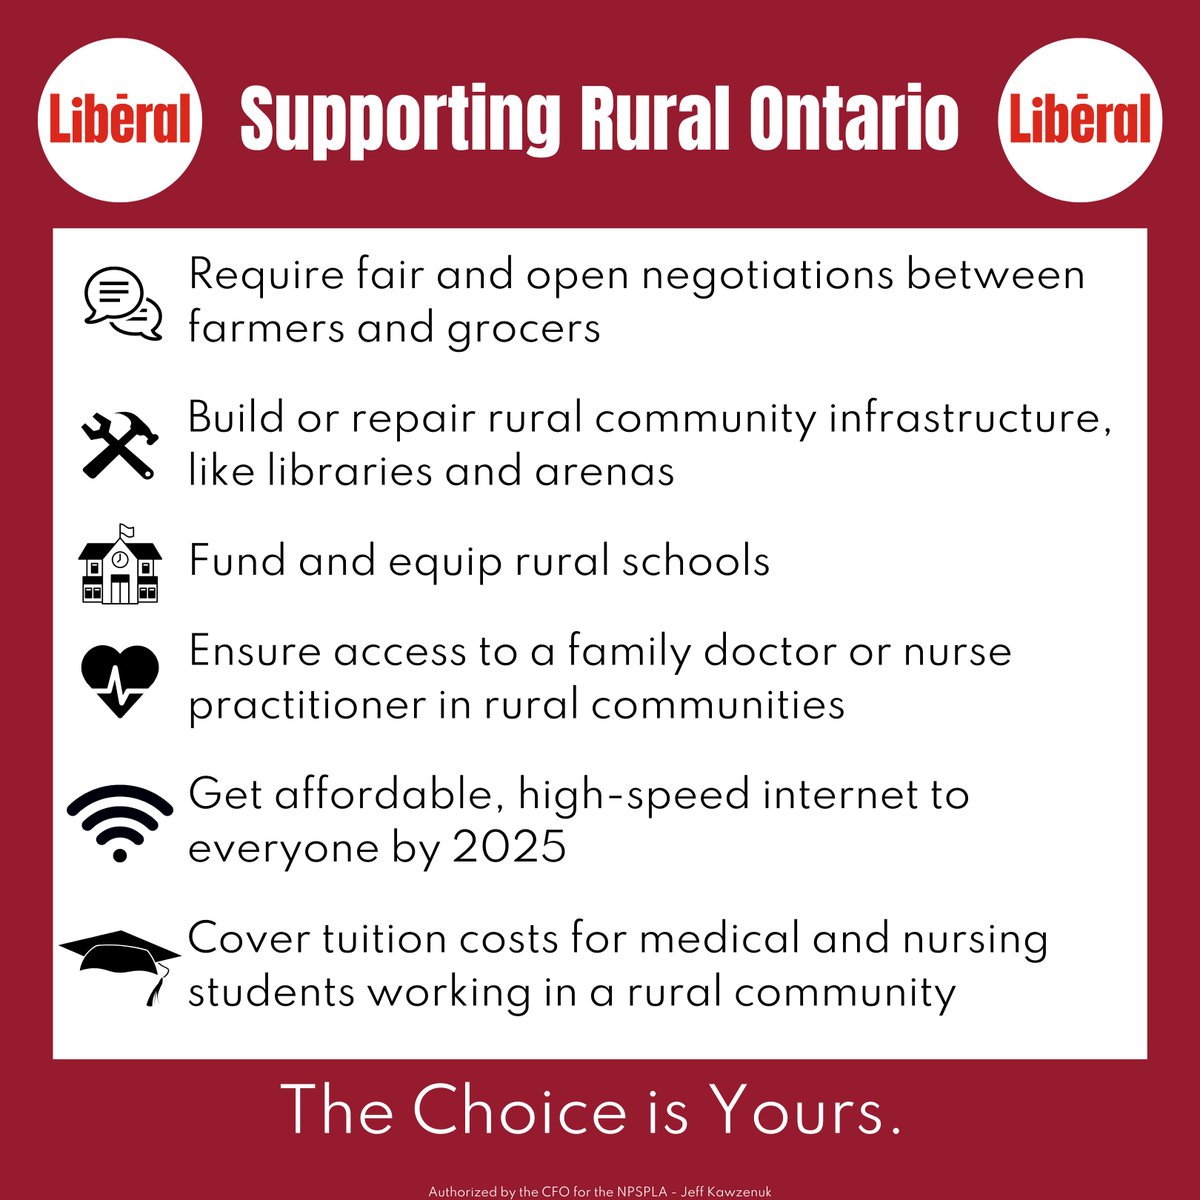 I had the pleasure of sitting on the @OntLiberal rural policy squad. I am proud to live in rural Ontario, and I believe we deserve a government that supports our communities' needs, protects our farmlands, and fosters growth. Ontario Liberals will do just that.